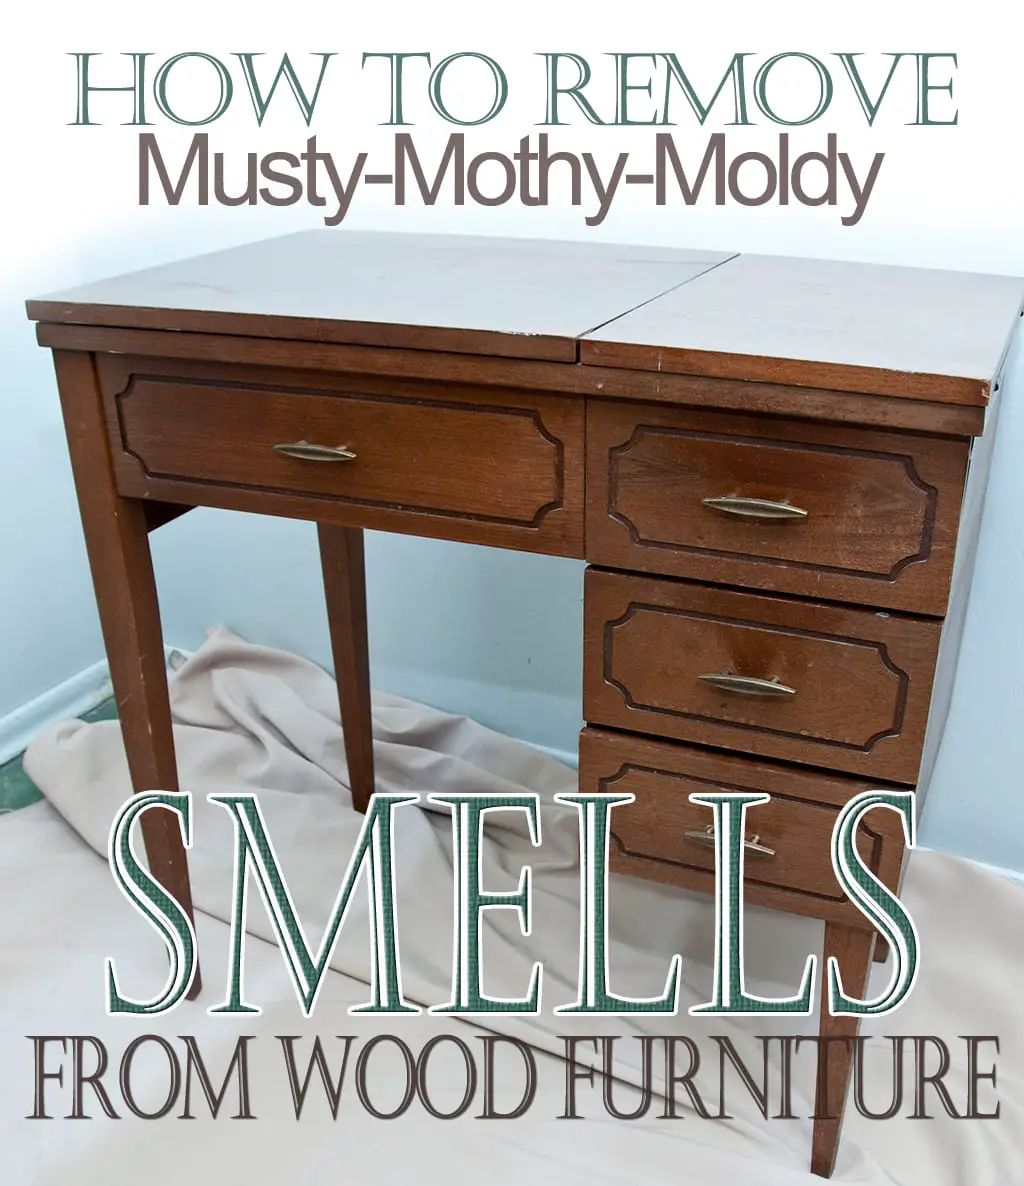 Mold Removal From Furniture